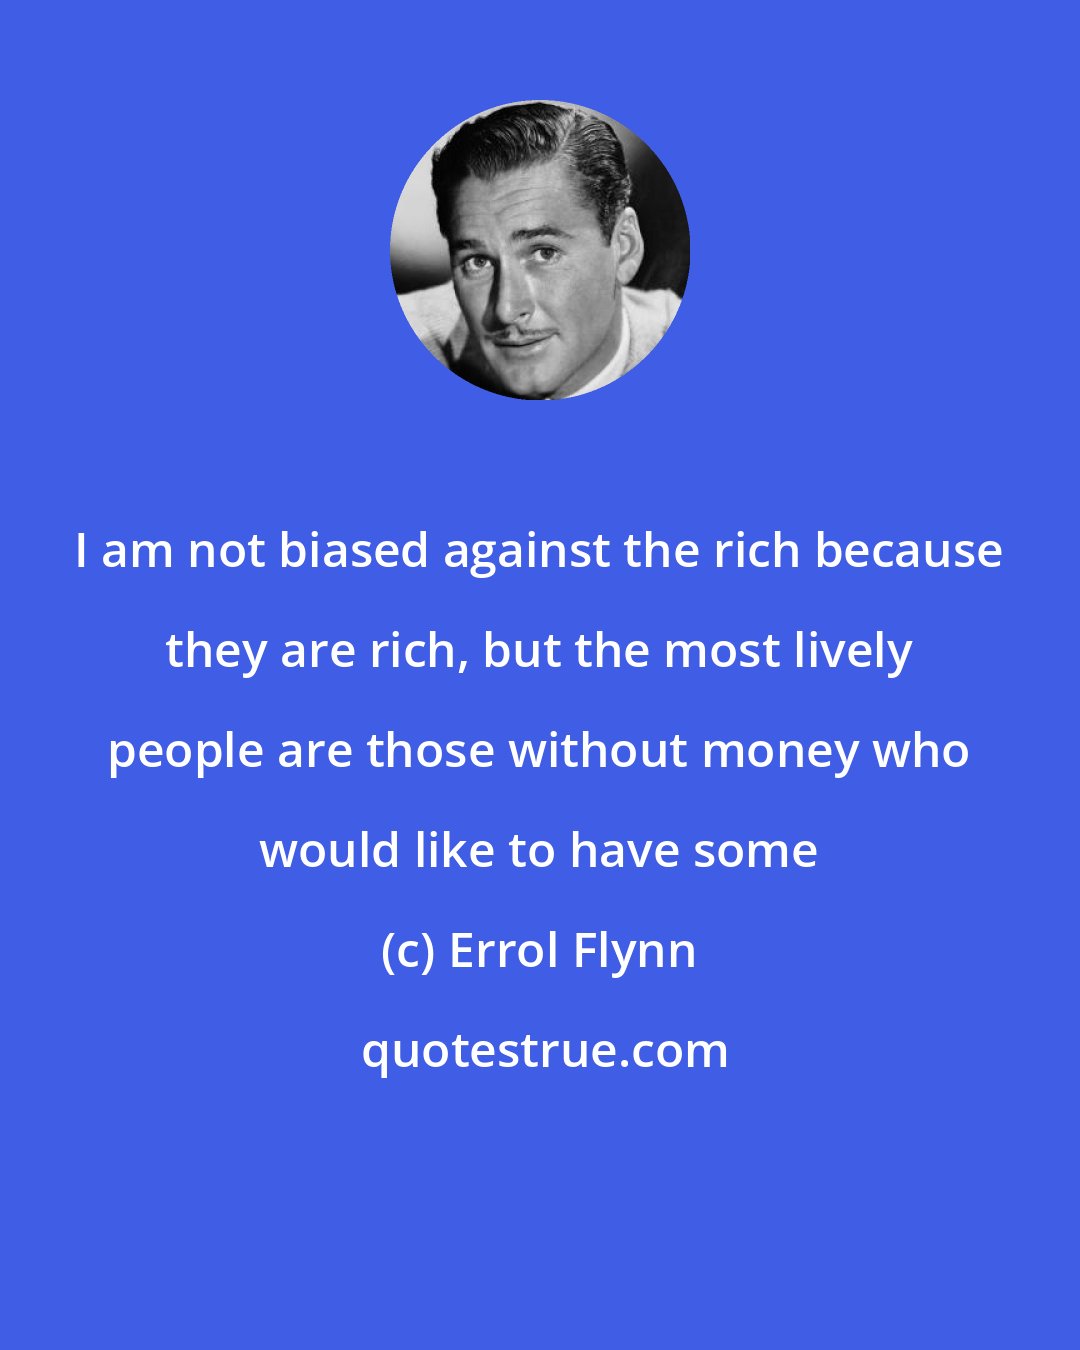 Errol Flynn: I am not biased against the rich because they are rich, but the most lively people are those without money who would like to have some